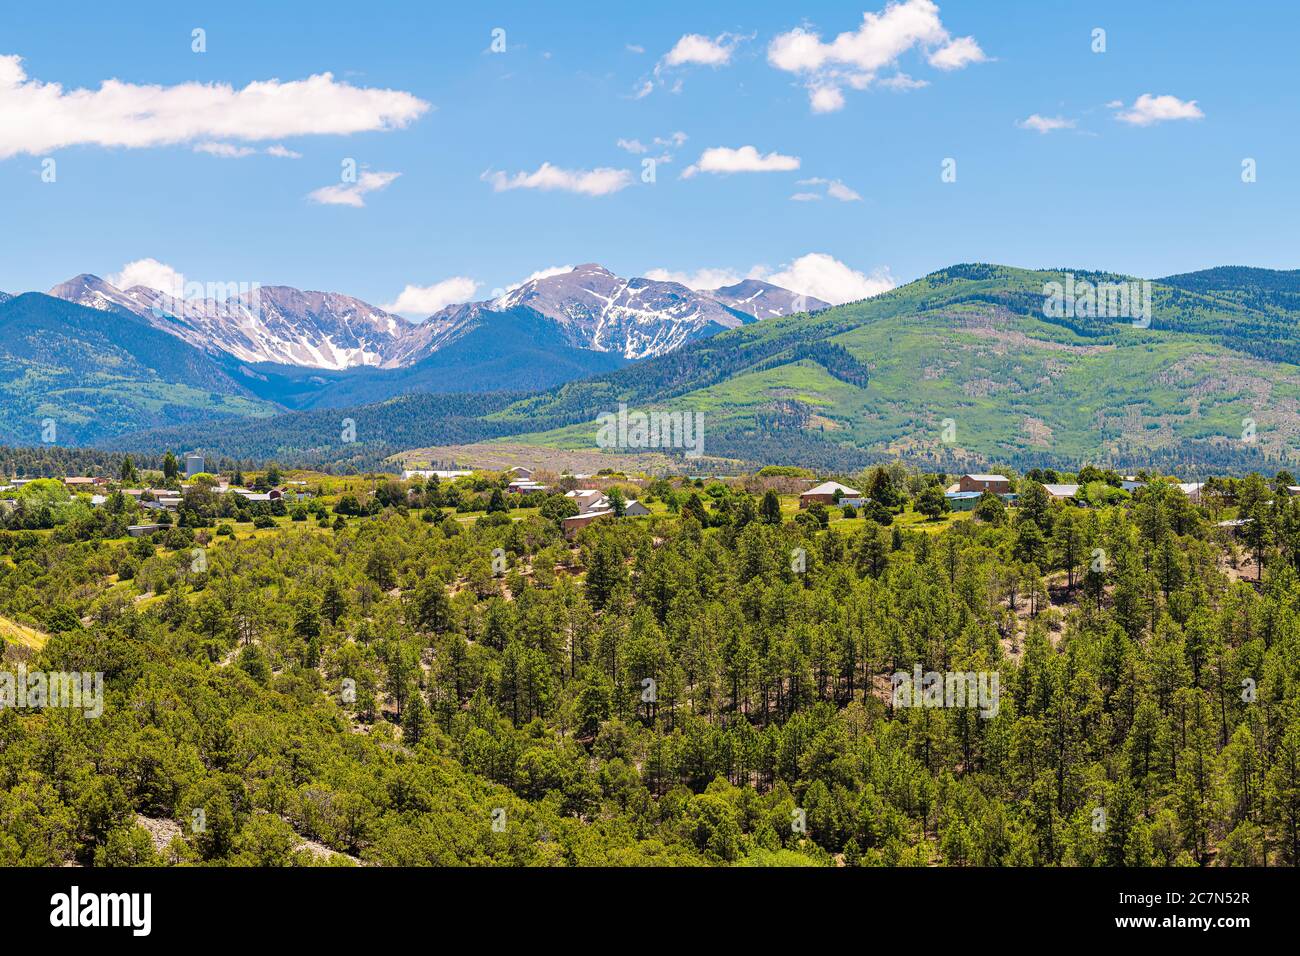 Landscape high angle panoramic cityscape view during summer from High Road to Taos of mountains and village called Truchas in New Mexico, USA Stock Photo